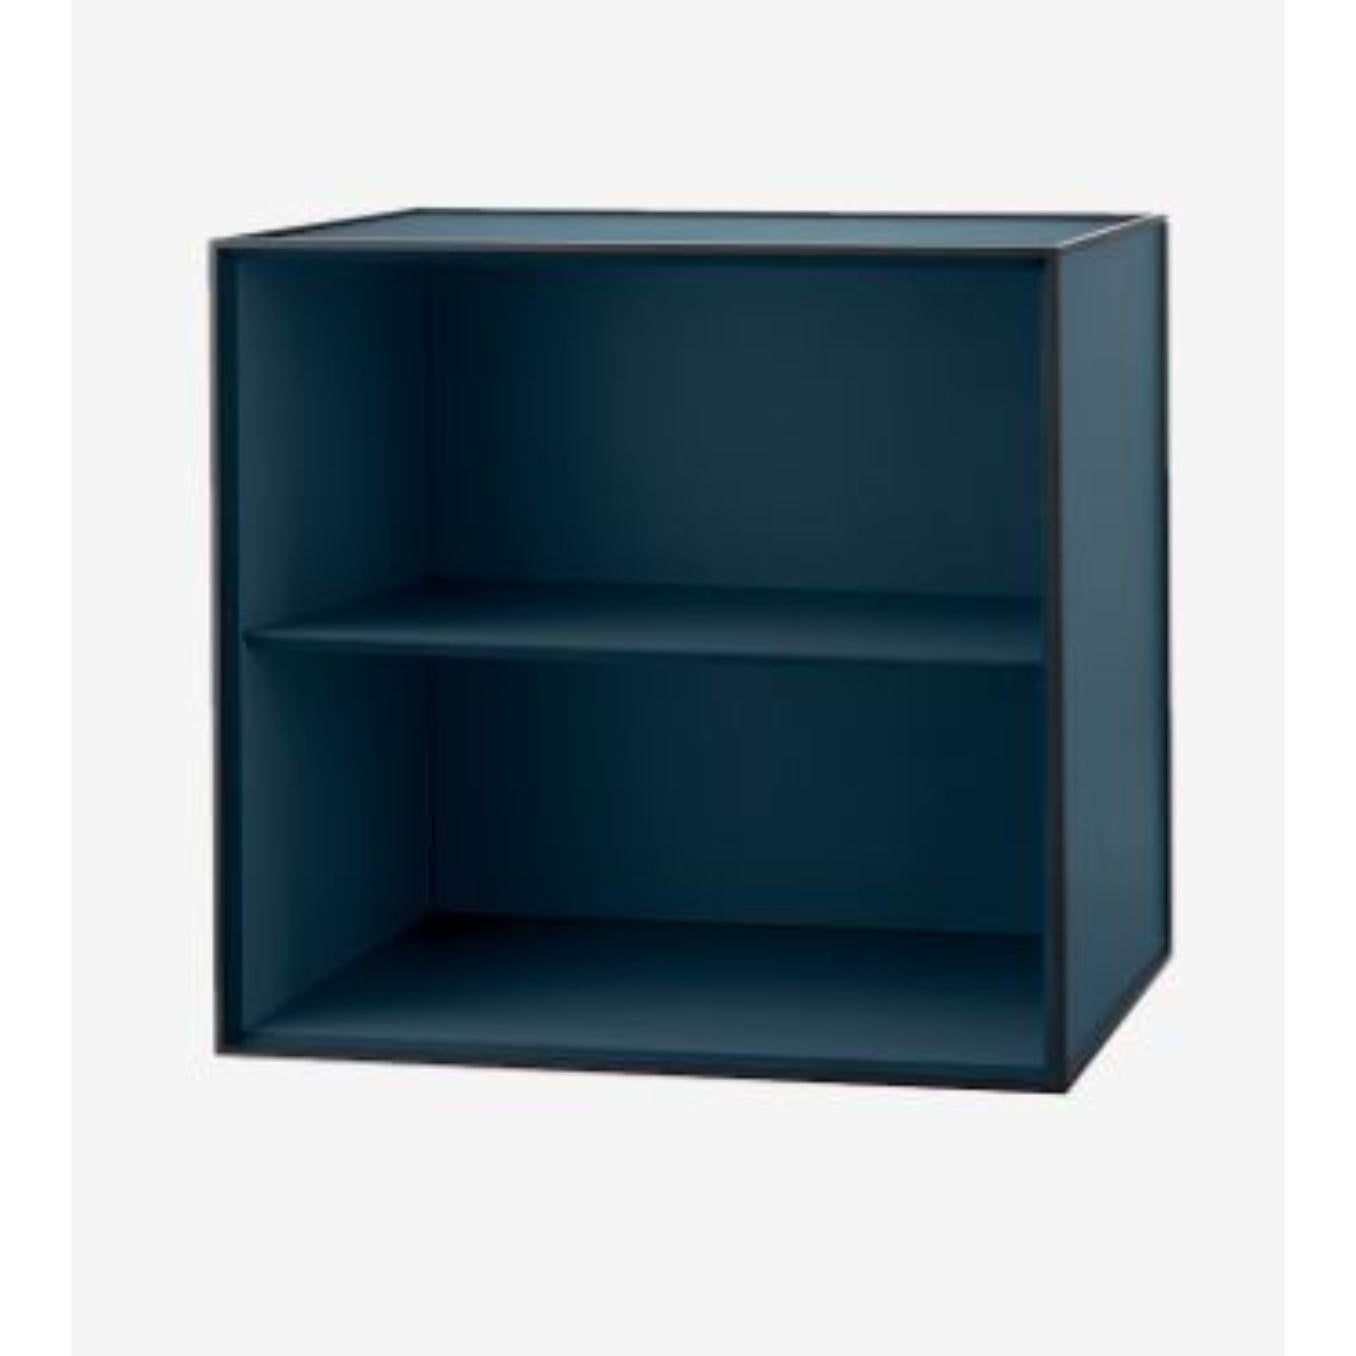 49 Fjord frame box with shelf by Lassen.
Dimensions: D 49 x W 42 x H 49 cm.
Materials: Finér, Melamin, Melamin, Melamine, Metal, Veneer
Also available in different colours and dimensions. 
Weight: 14 Kg


By Lassen is a Danish design brand